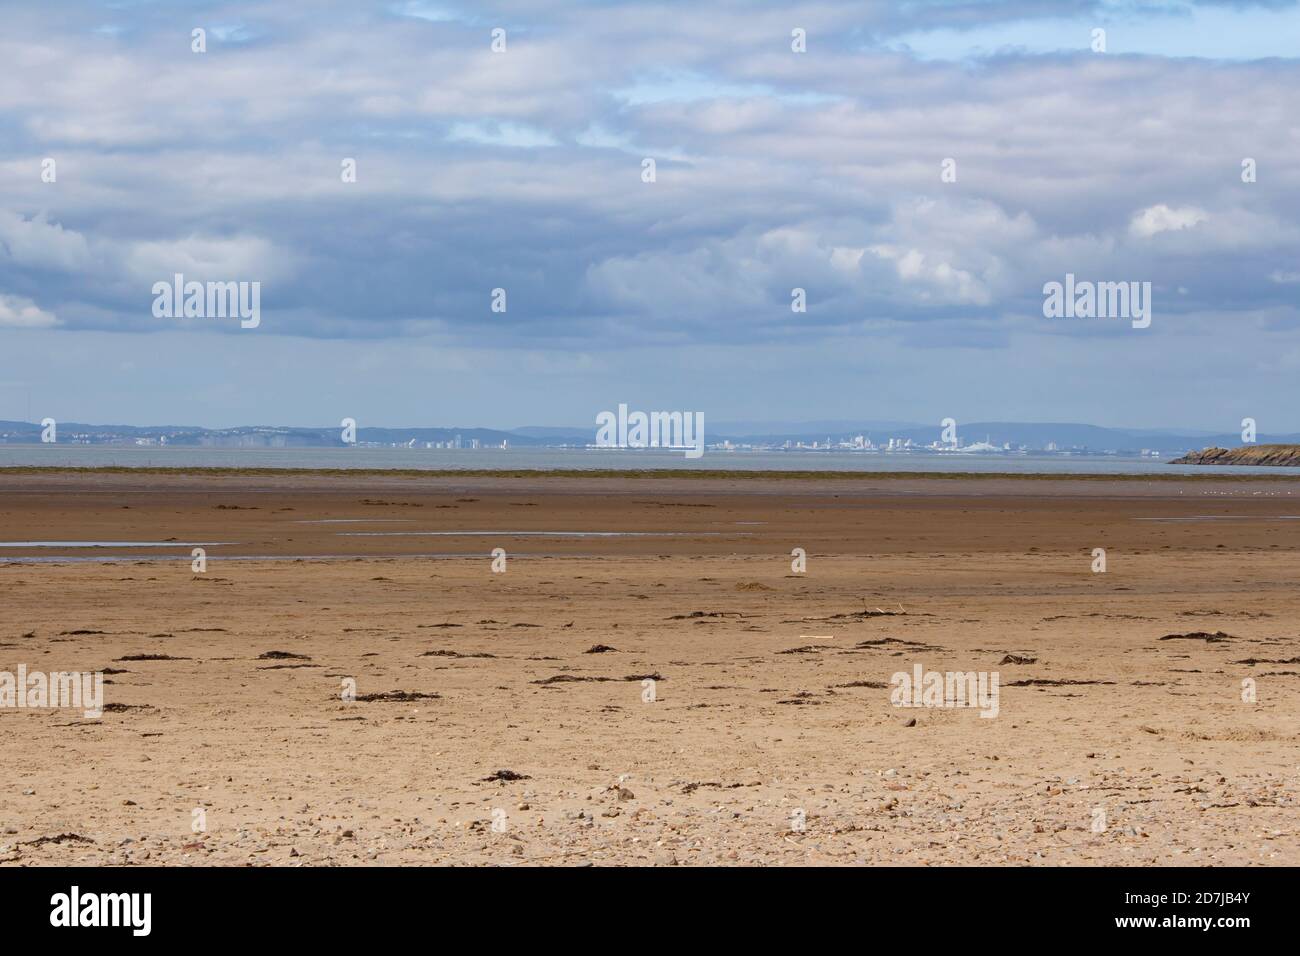 View from Sand Bay, Kewstoke, Somerset, United Kingdom looking towards Cardiff, Wales Stock Photo